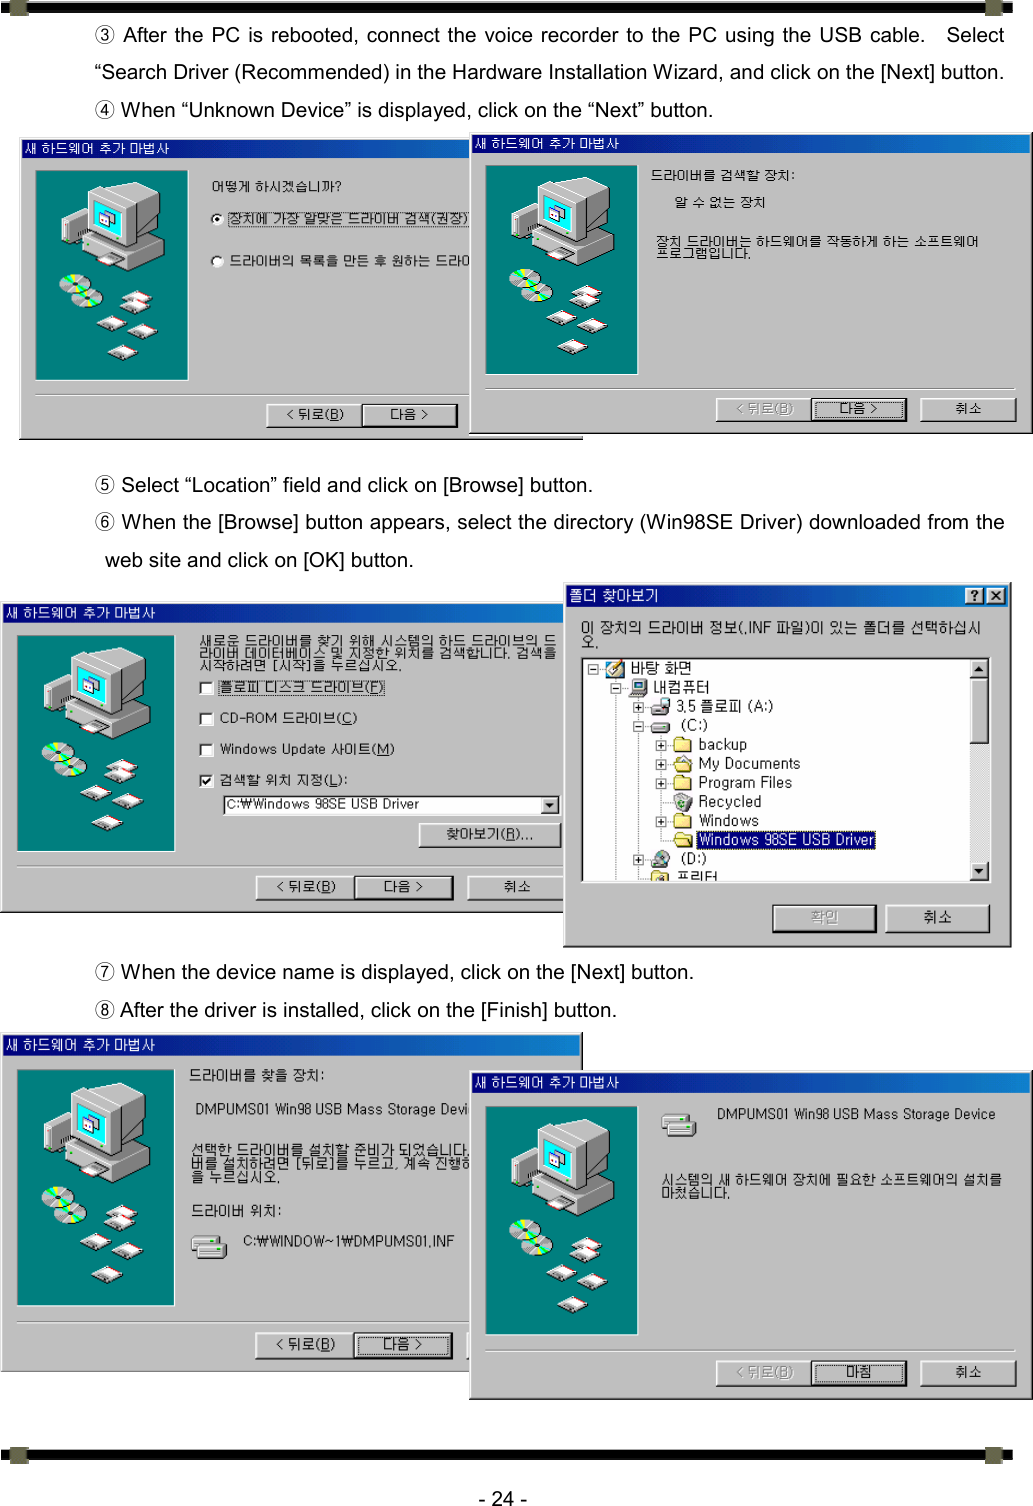      - 24 - ③ After the PC is rebooted, connect the voice recorder to the PC using the USB cable.    Select “Search Driver (Recommended) in the Hardware Installation Wizard, and click on the [Next] button. ④ When “Unknown Device” is displayed, click on the “Next” button.            ⑤ Select “Location” field and click on [Browse] button.  When the [Browse] button appears, select the directory (Win98SE Driver) downloaded from the ⑥web site and click on [OK] button.              When the device name is displayed, click on the [Next] button.⑦  After the⑧ driver is installed, click on the [Finish] button.           